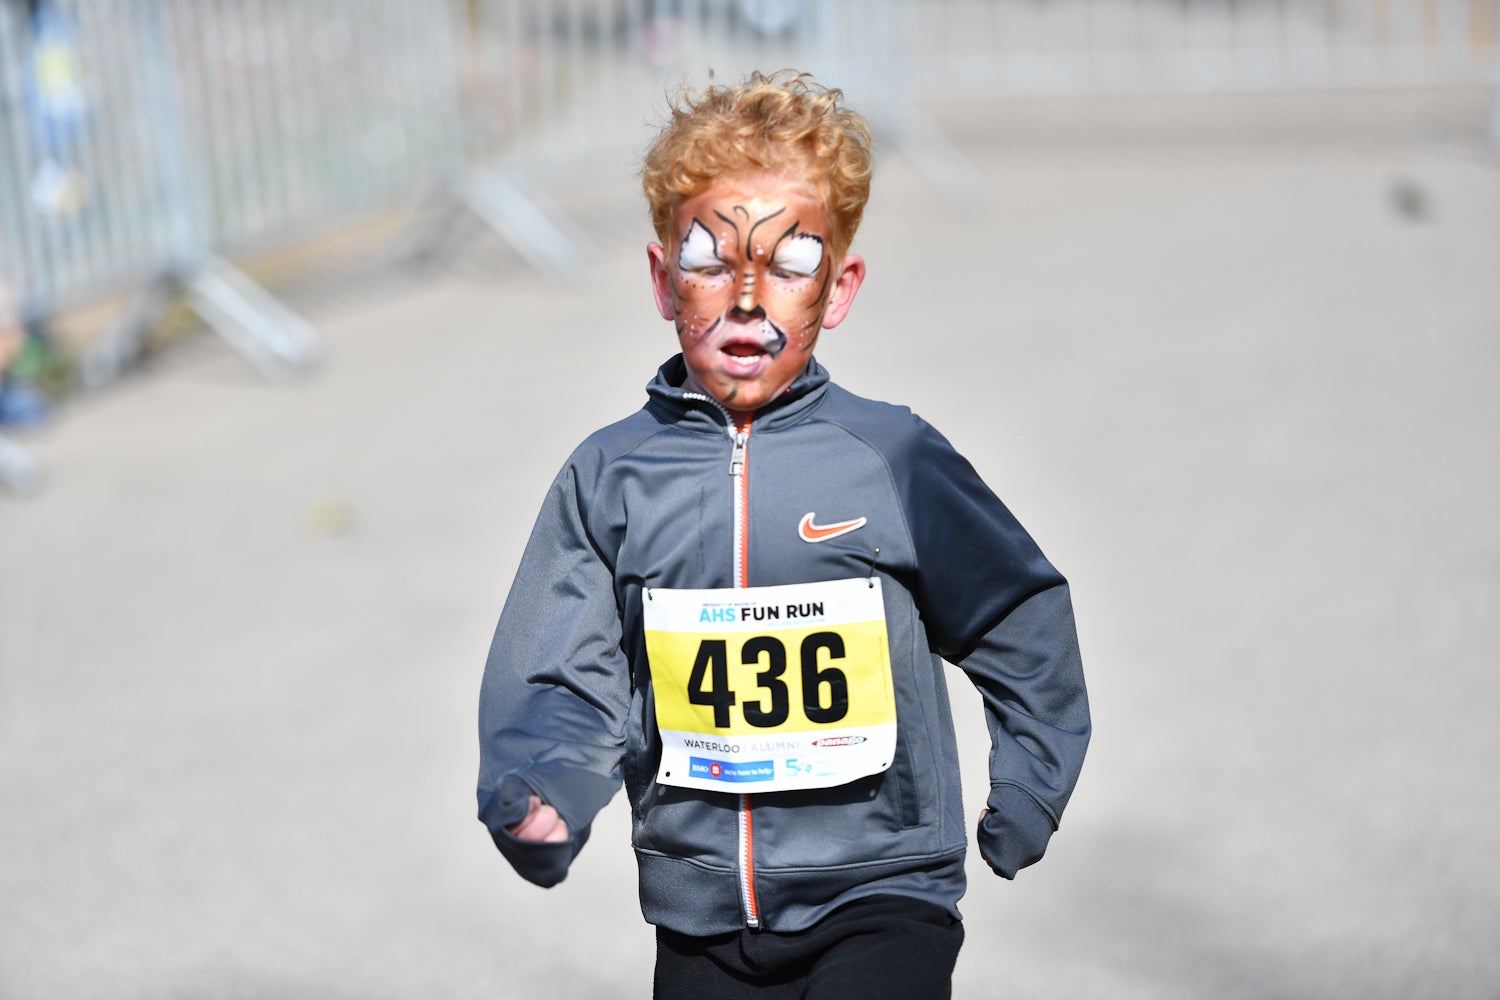 Child with face paint running